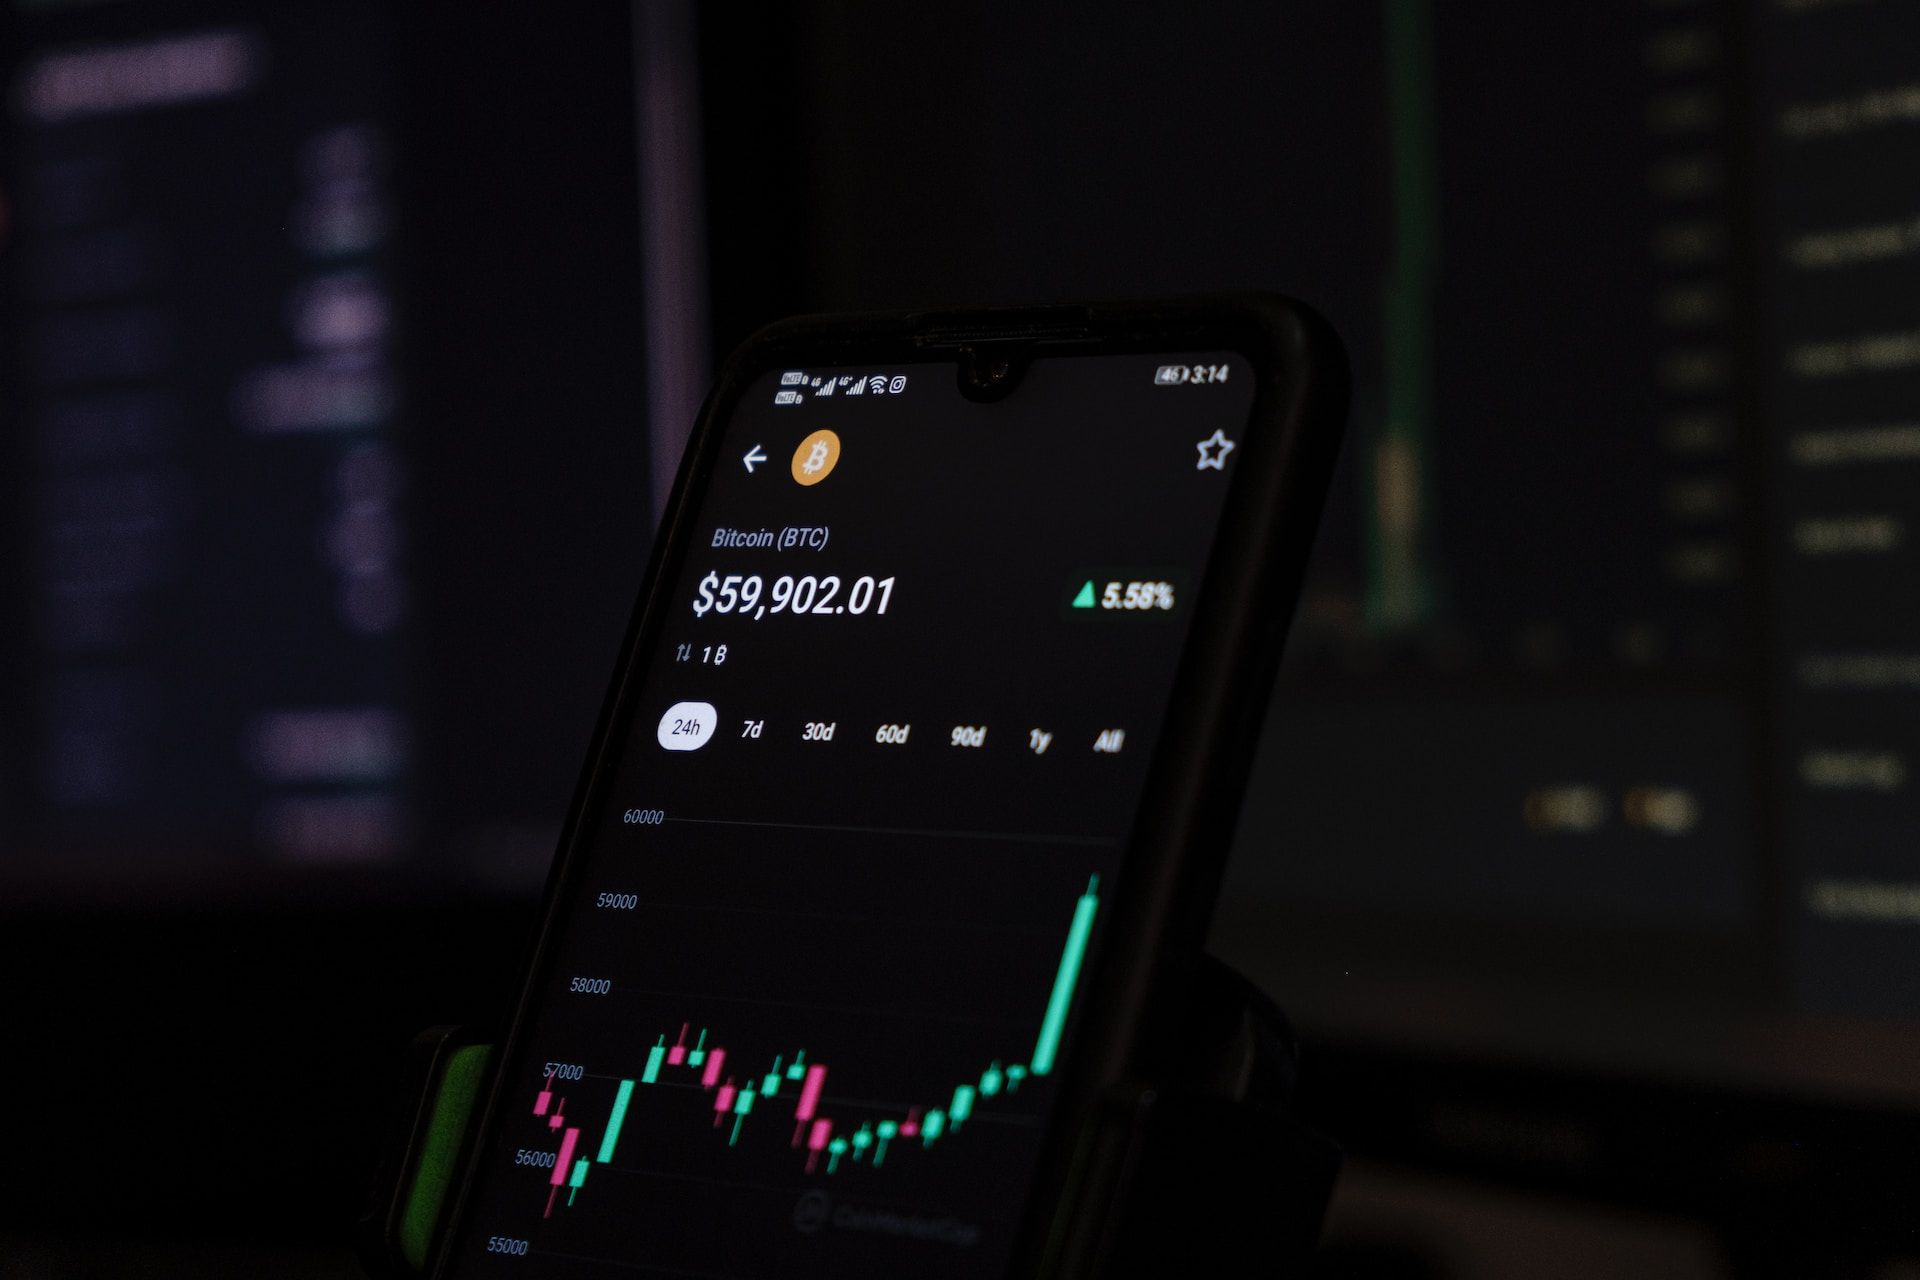 A smartphone wallet and trading app showing graph of Bitcoin value